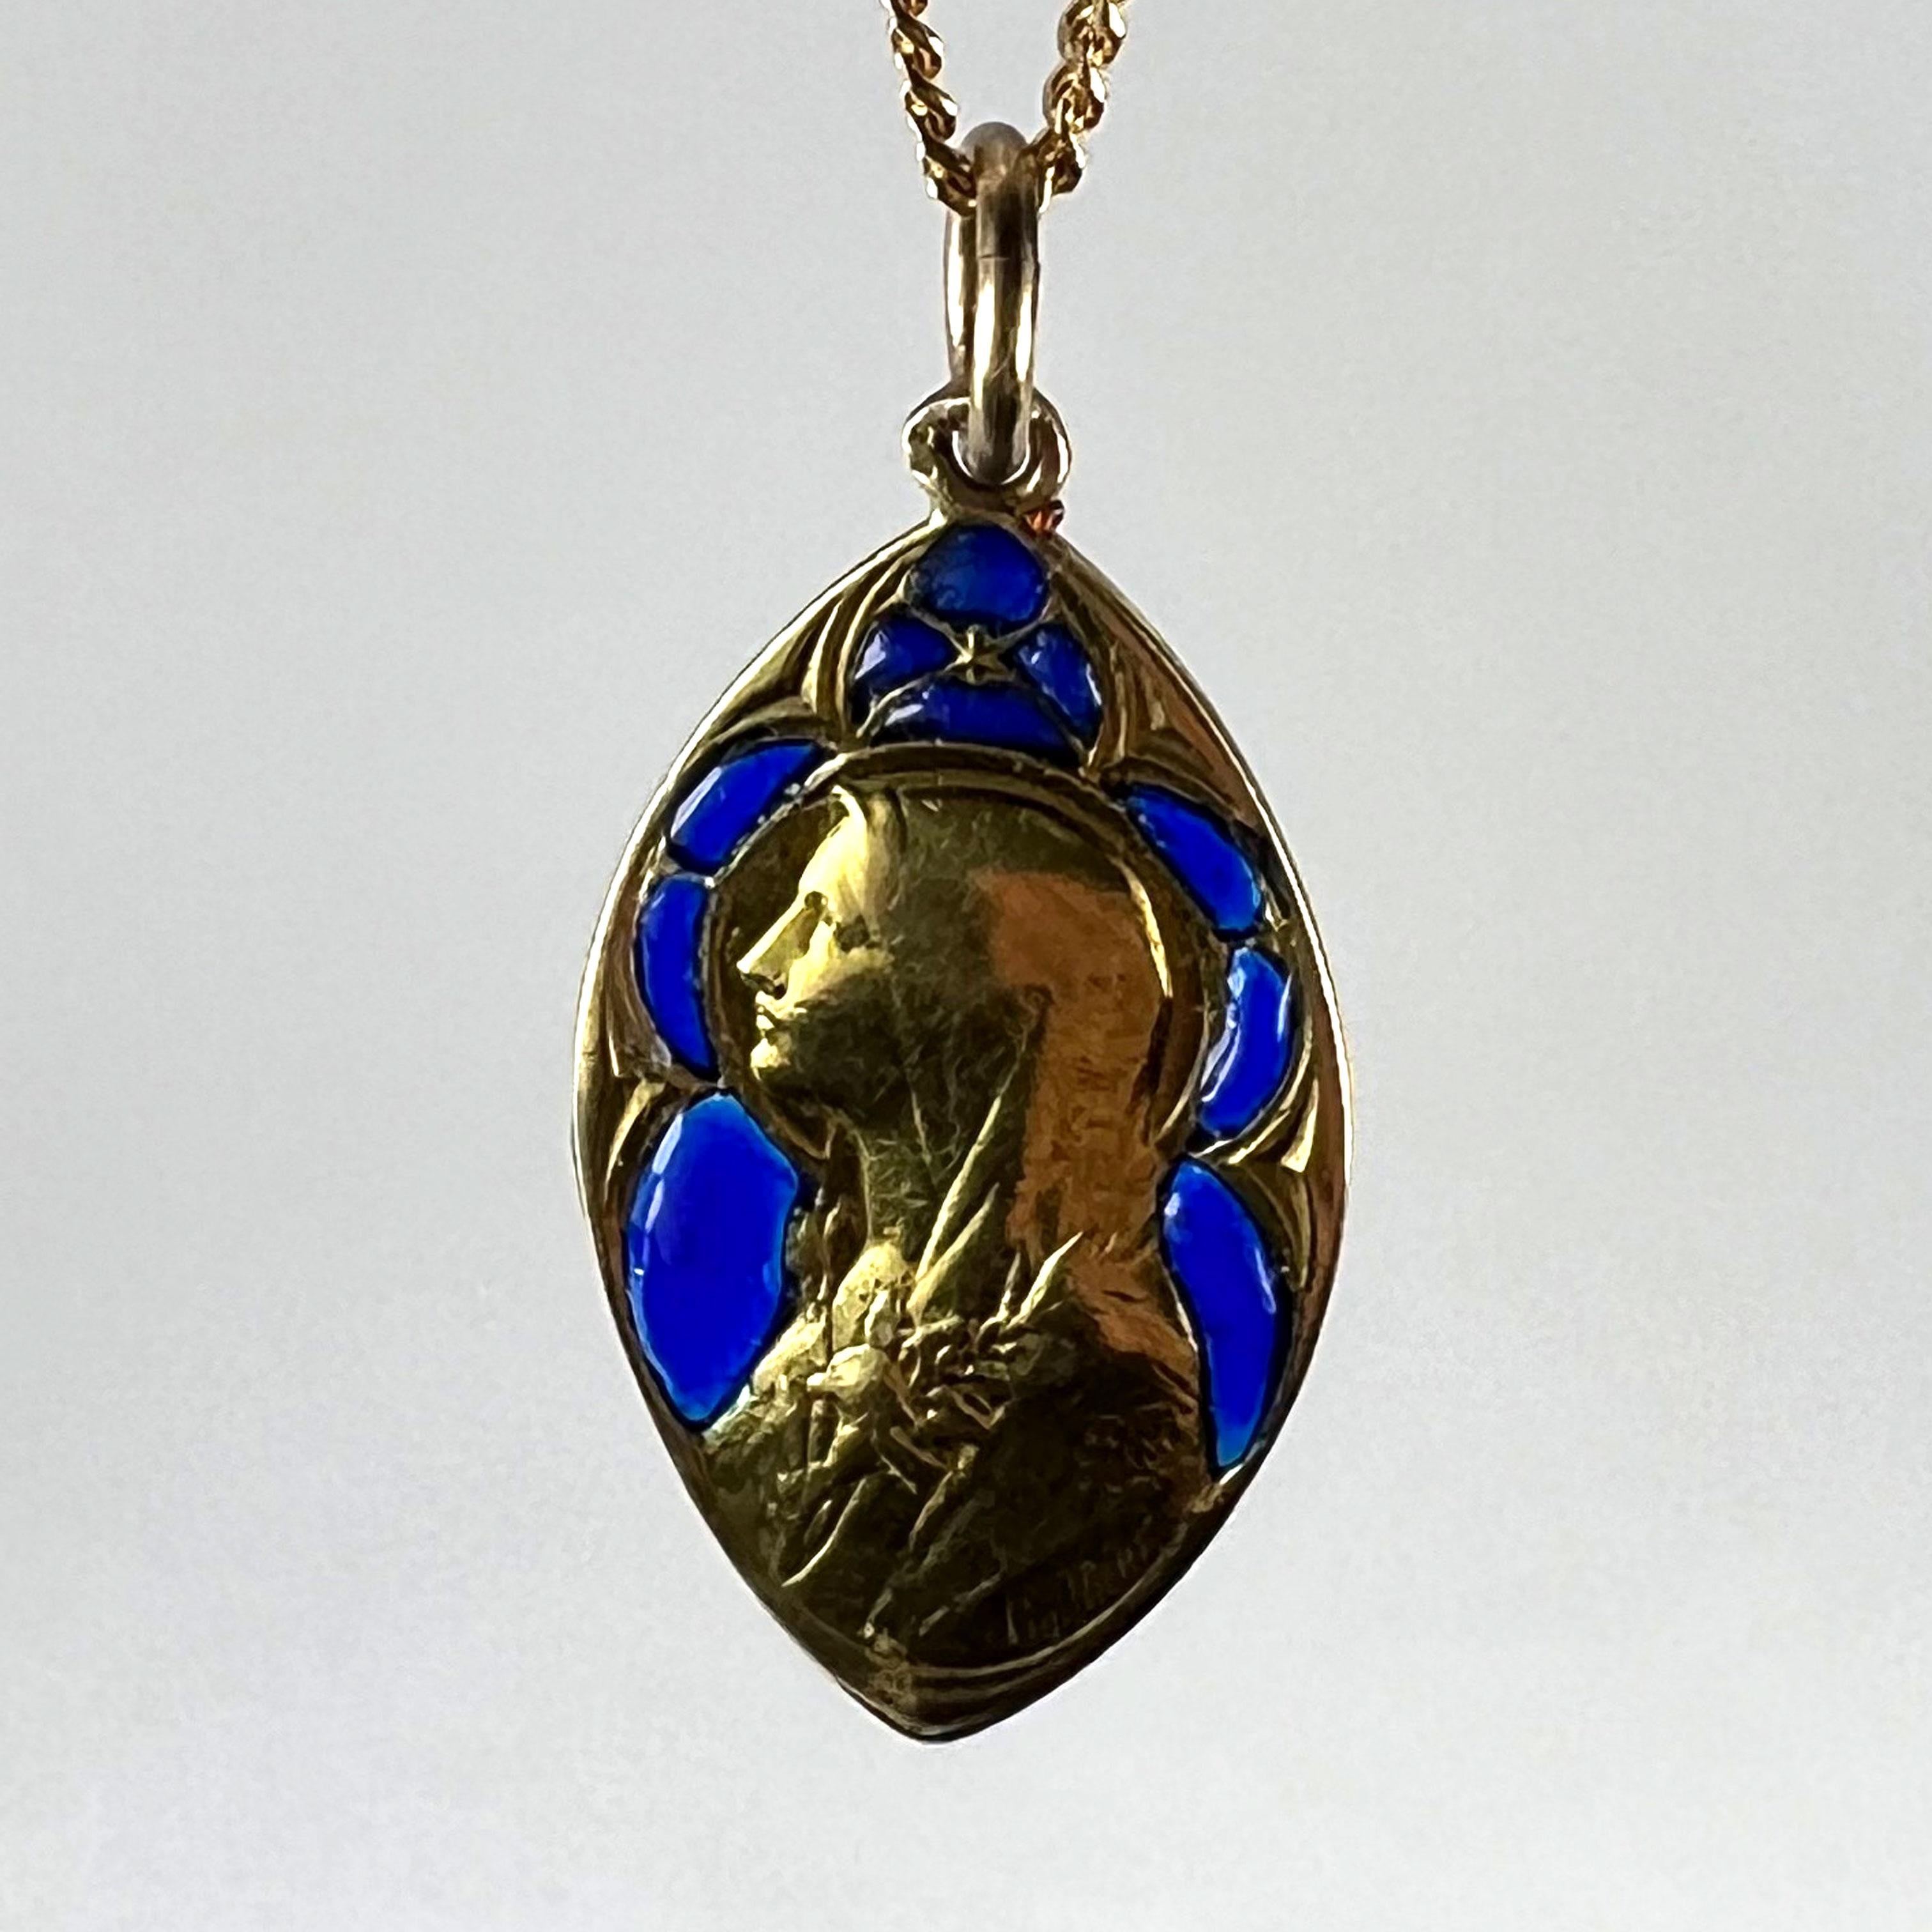 French Guilbert Virgin Mary Plique A Jour Enamel 18K Yellow Gold Pendant Medal For Sale 9